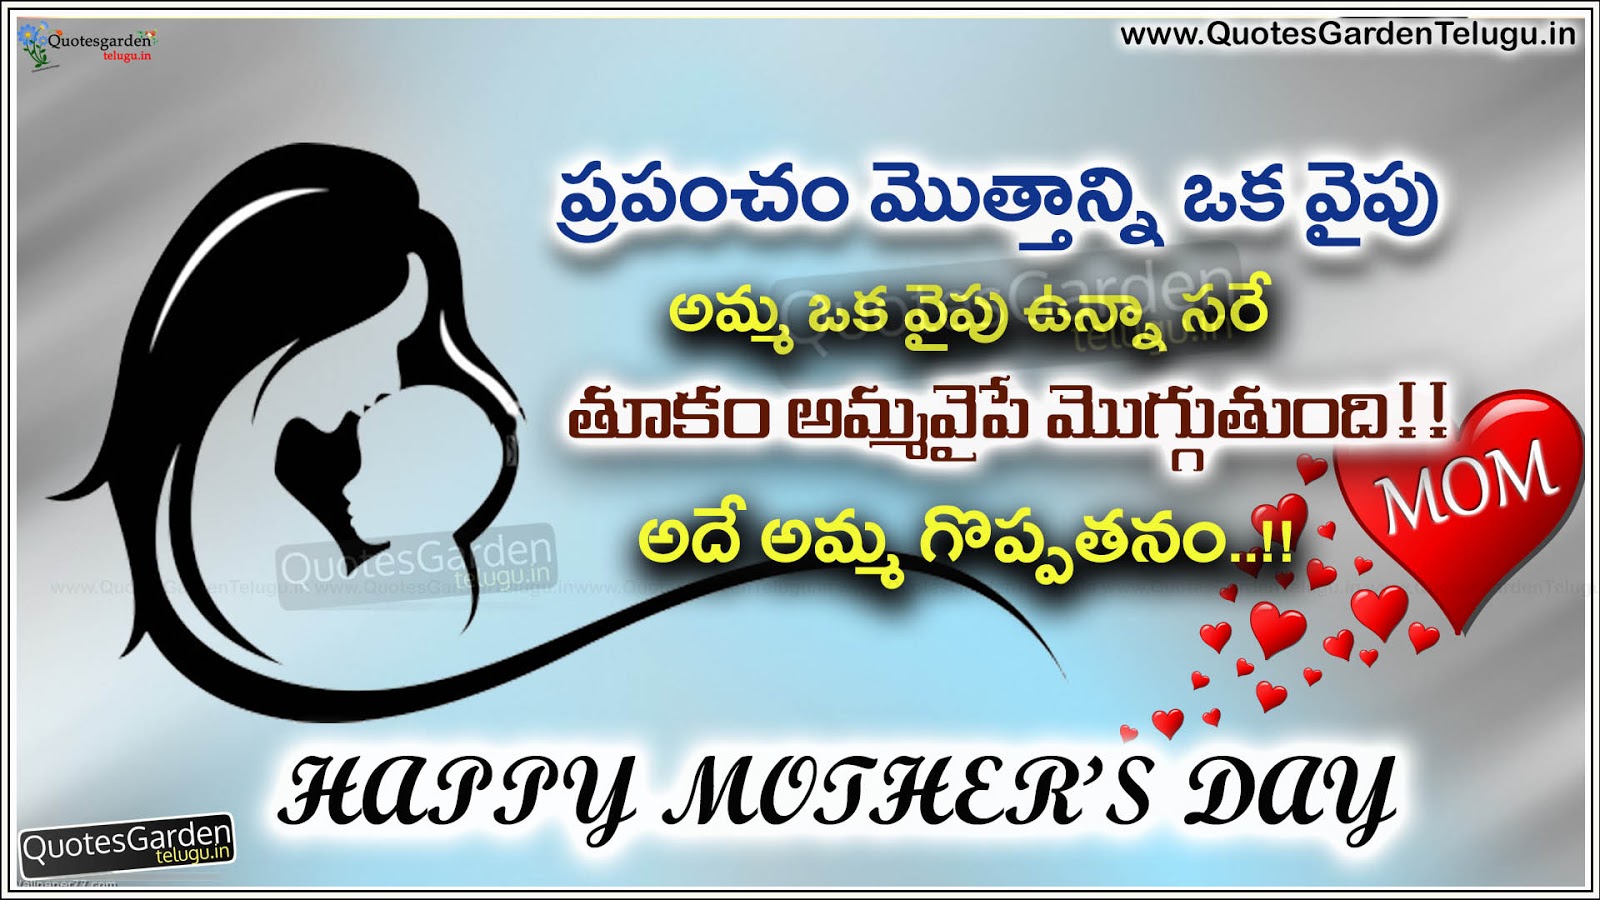 Happy mothers Day wishes Greetings quotes messages in telugu | QUOTES  GARDEN TELUGU | Telugu Quotes | English Quotes | Hindi Quotes |